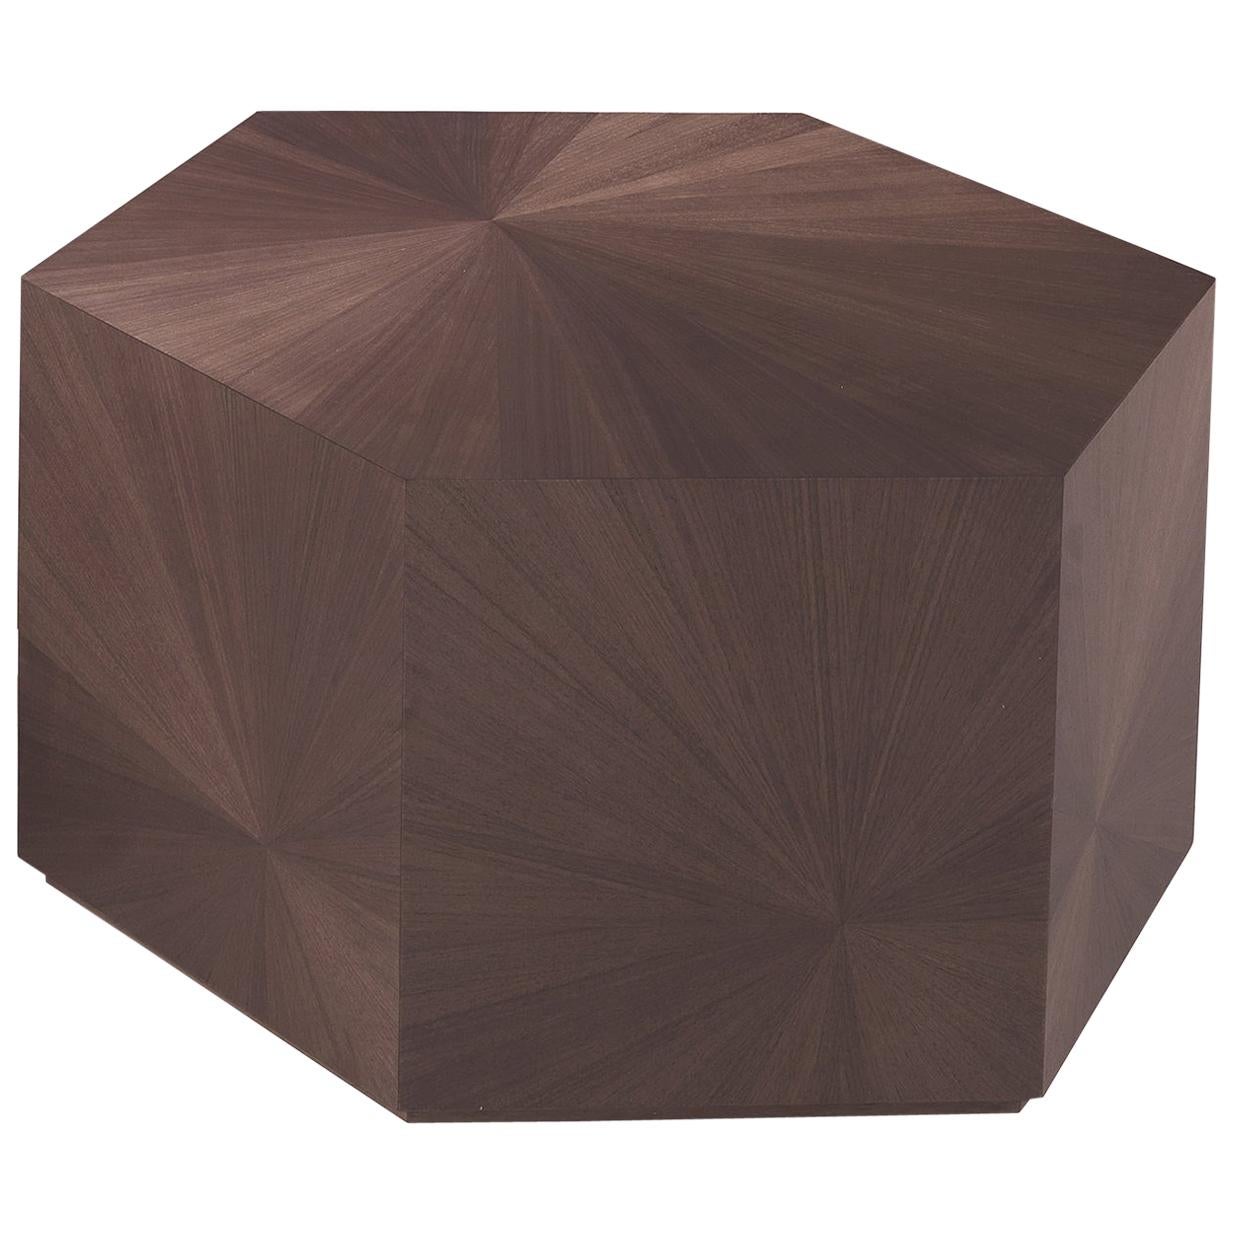 Brown Hexagonal Coffee Table For Sale